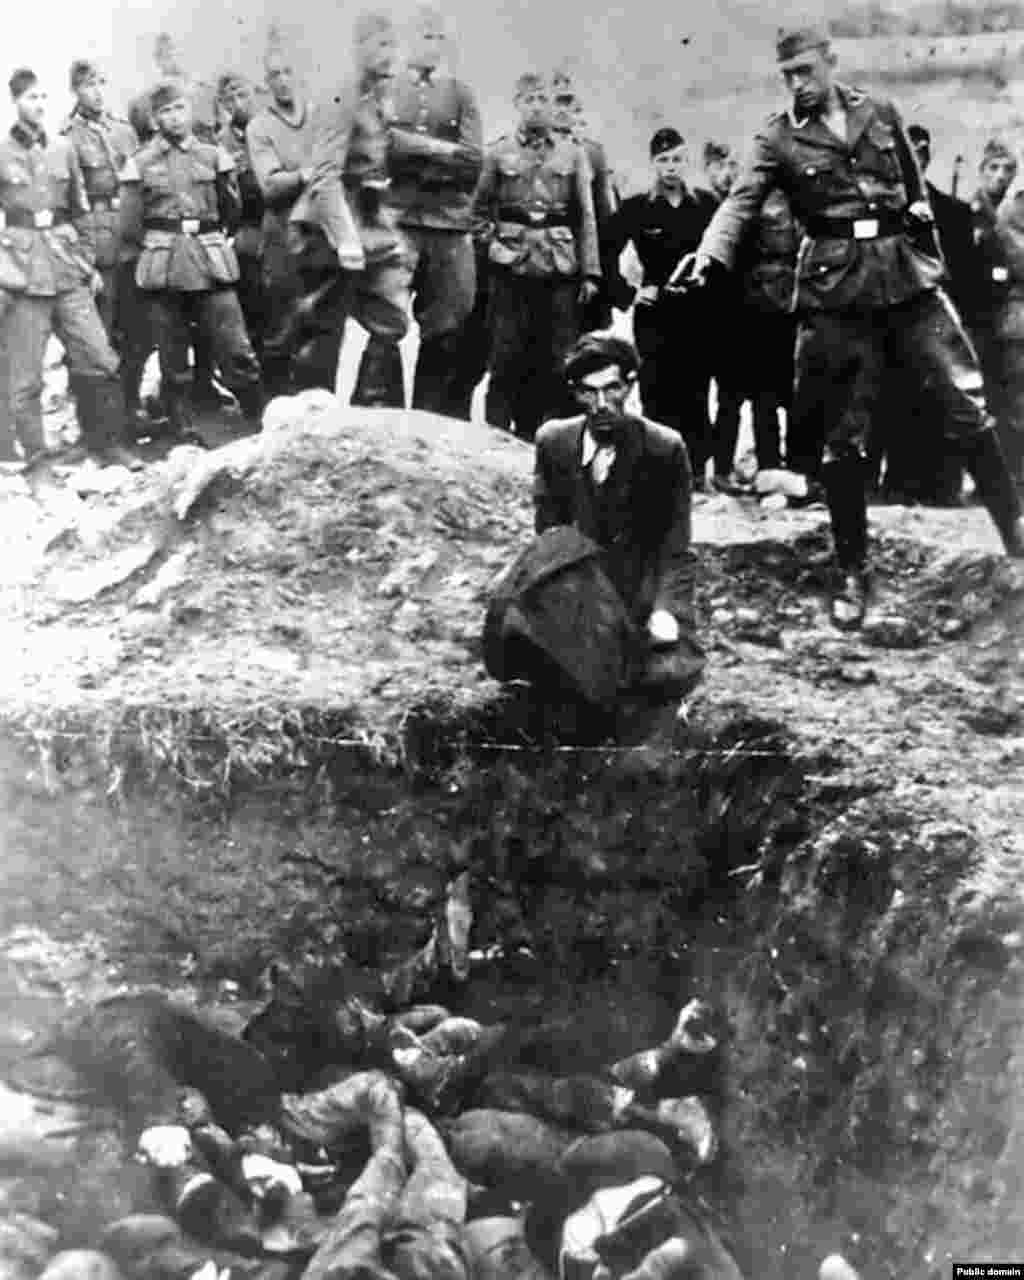 A Jewish man about to be executed in Vinnytsia, Ukraine &nbsp; British historian and author Jonathan Dimbleby says the atrocities carried out by the Nazis -- and to a lesser-extent the vengeful Red Army that he researched -- are &quot;hardly bearable to talk about.&quot;